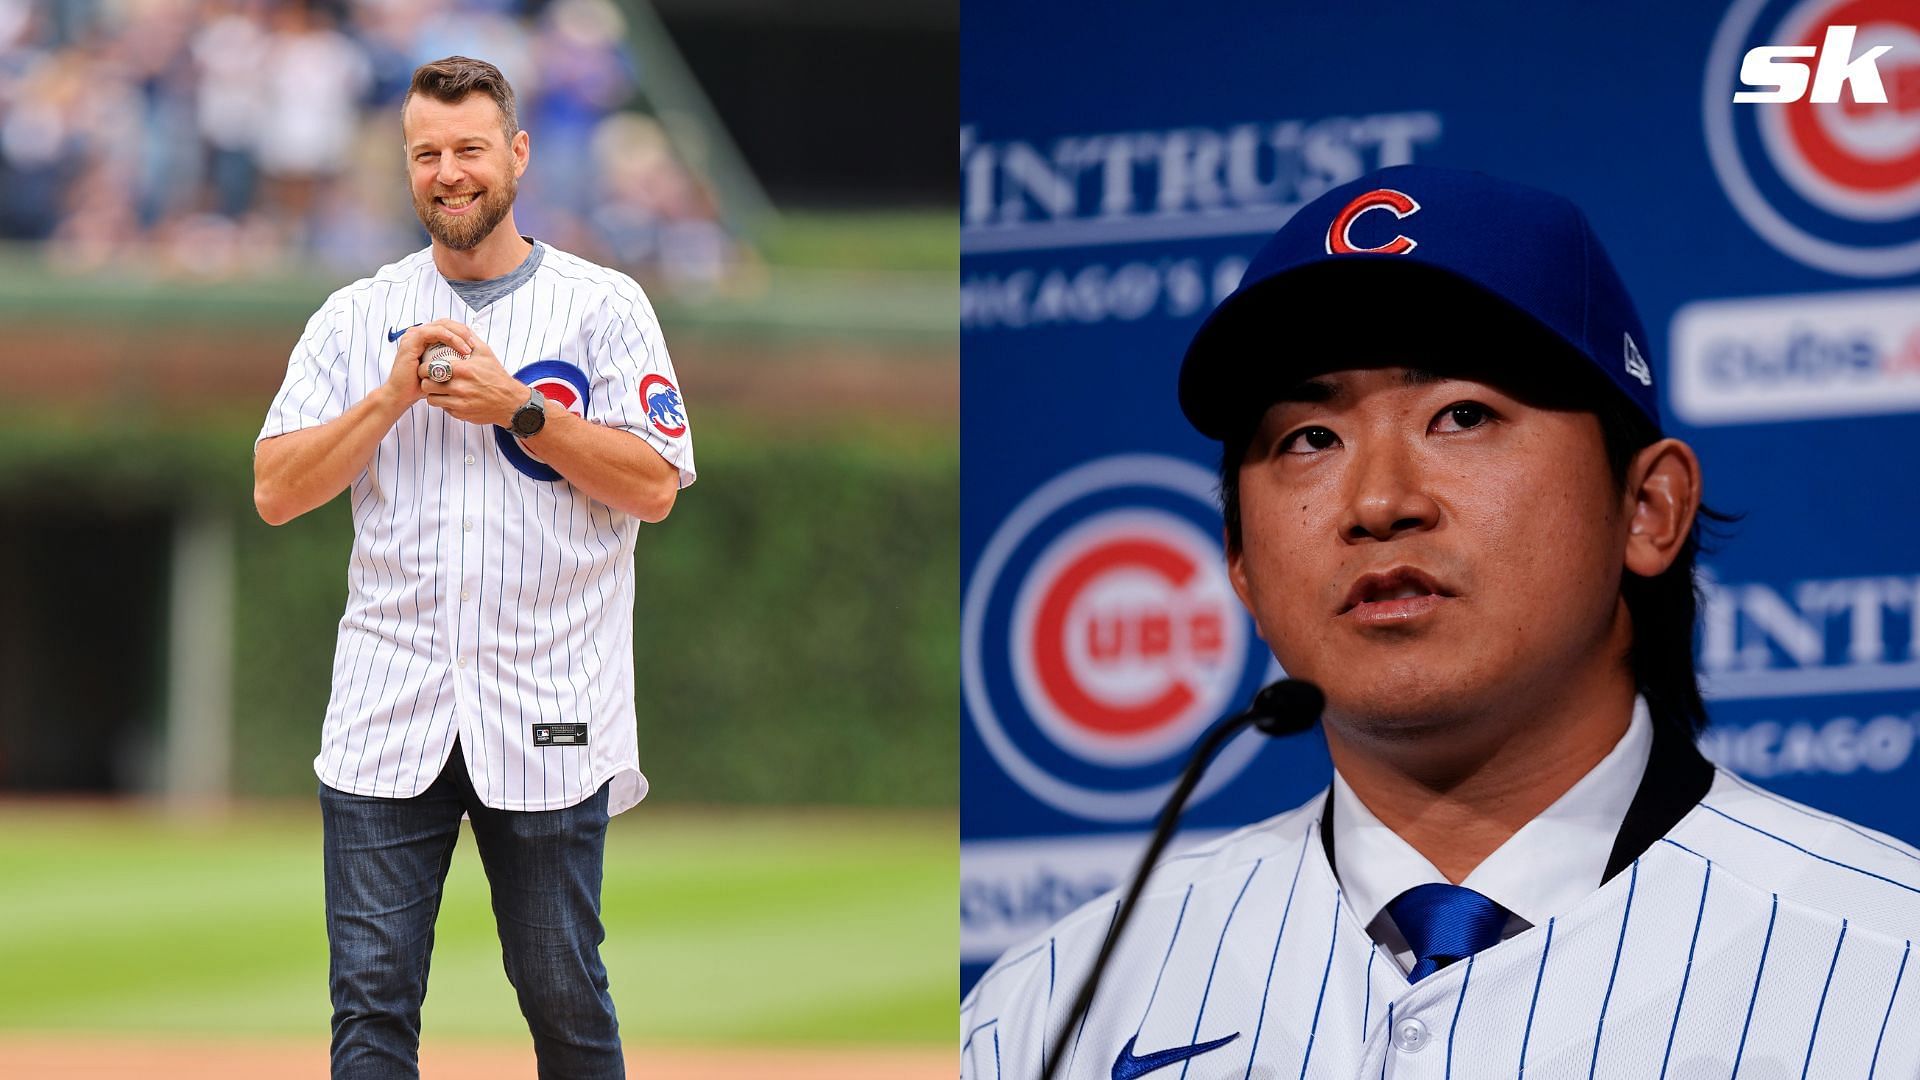 Is 2016 World Series MVP Ben Zobrist the reason why Shota Imanaga chose No. 18? Story behind new Cubs pitcher